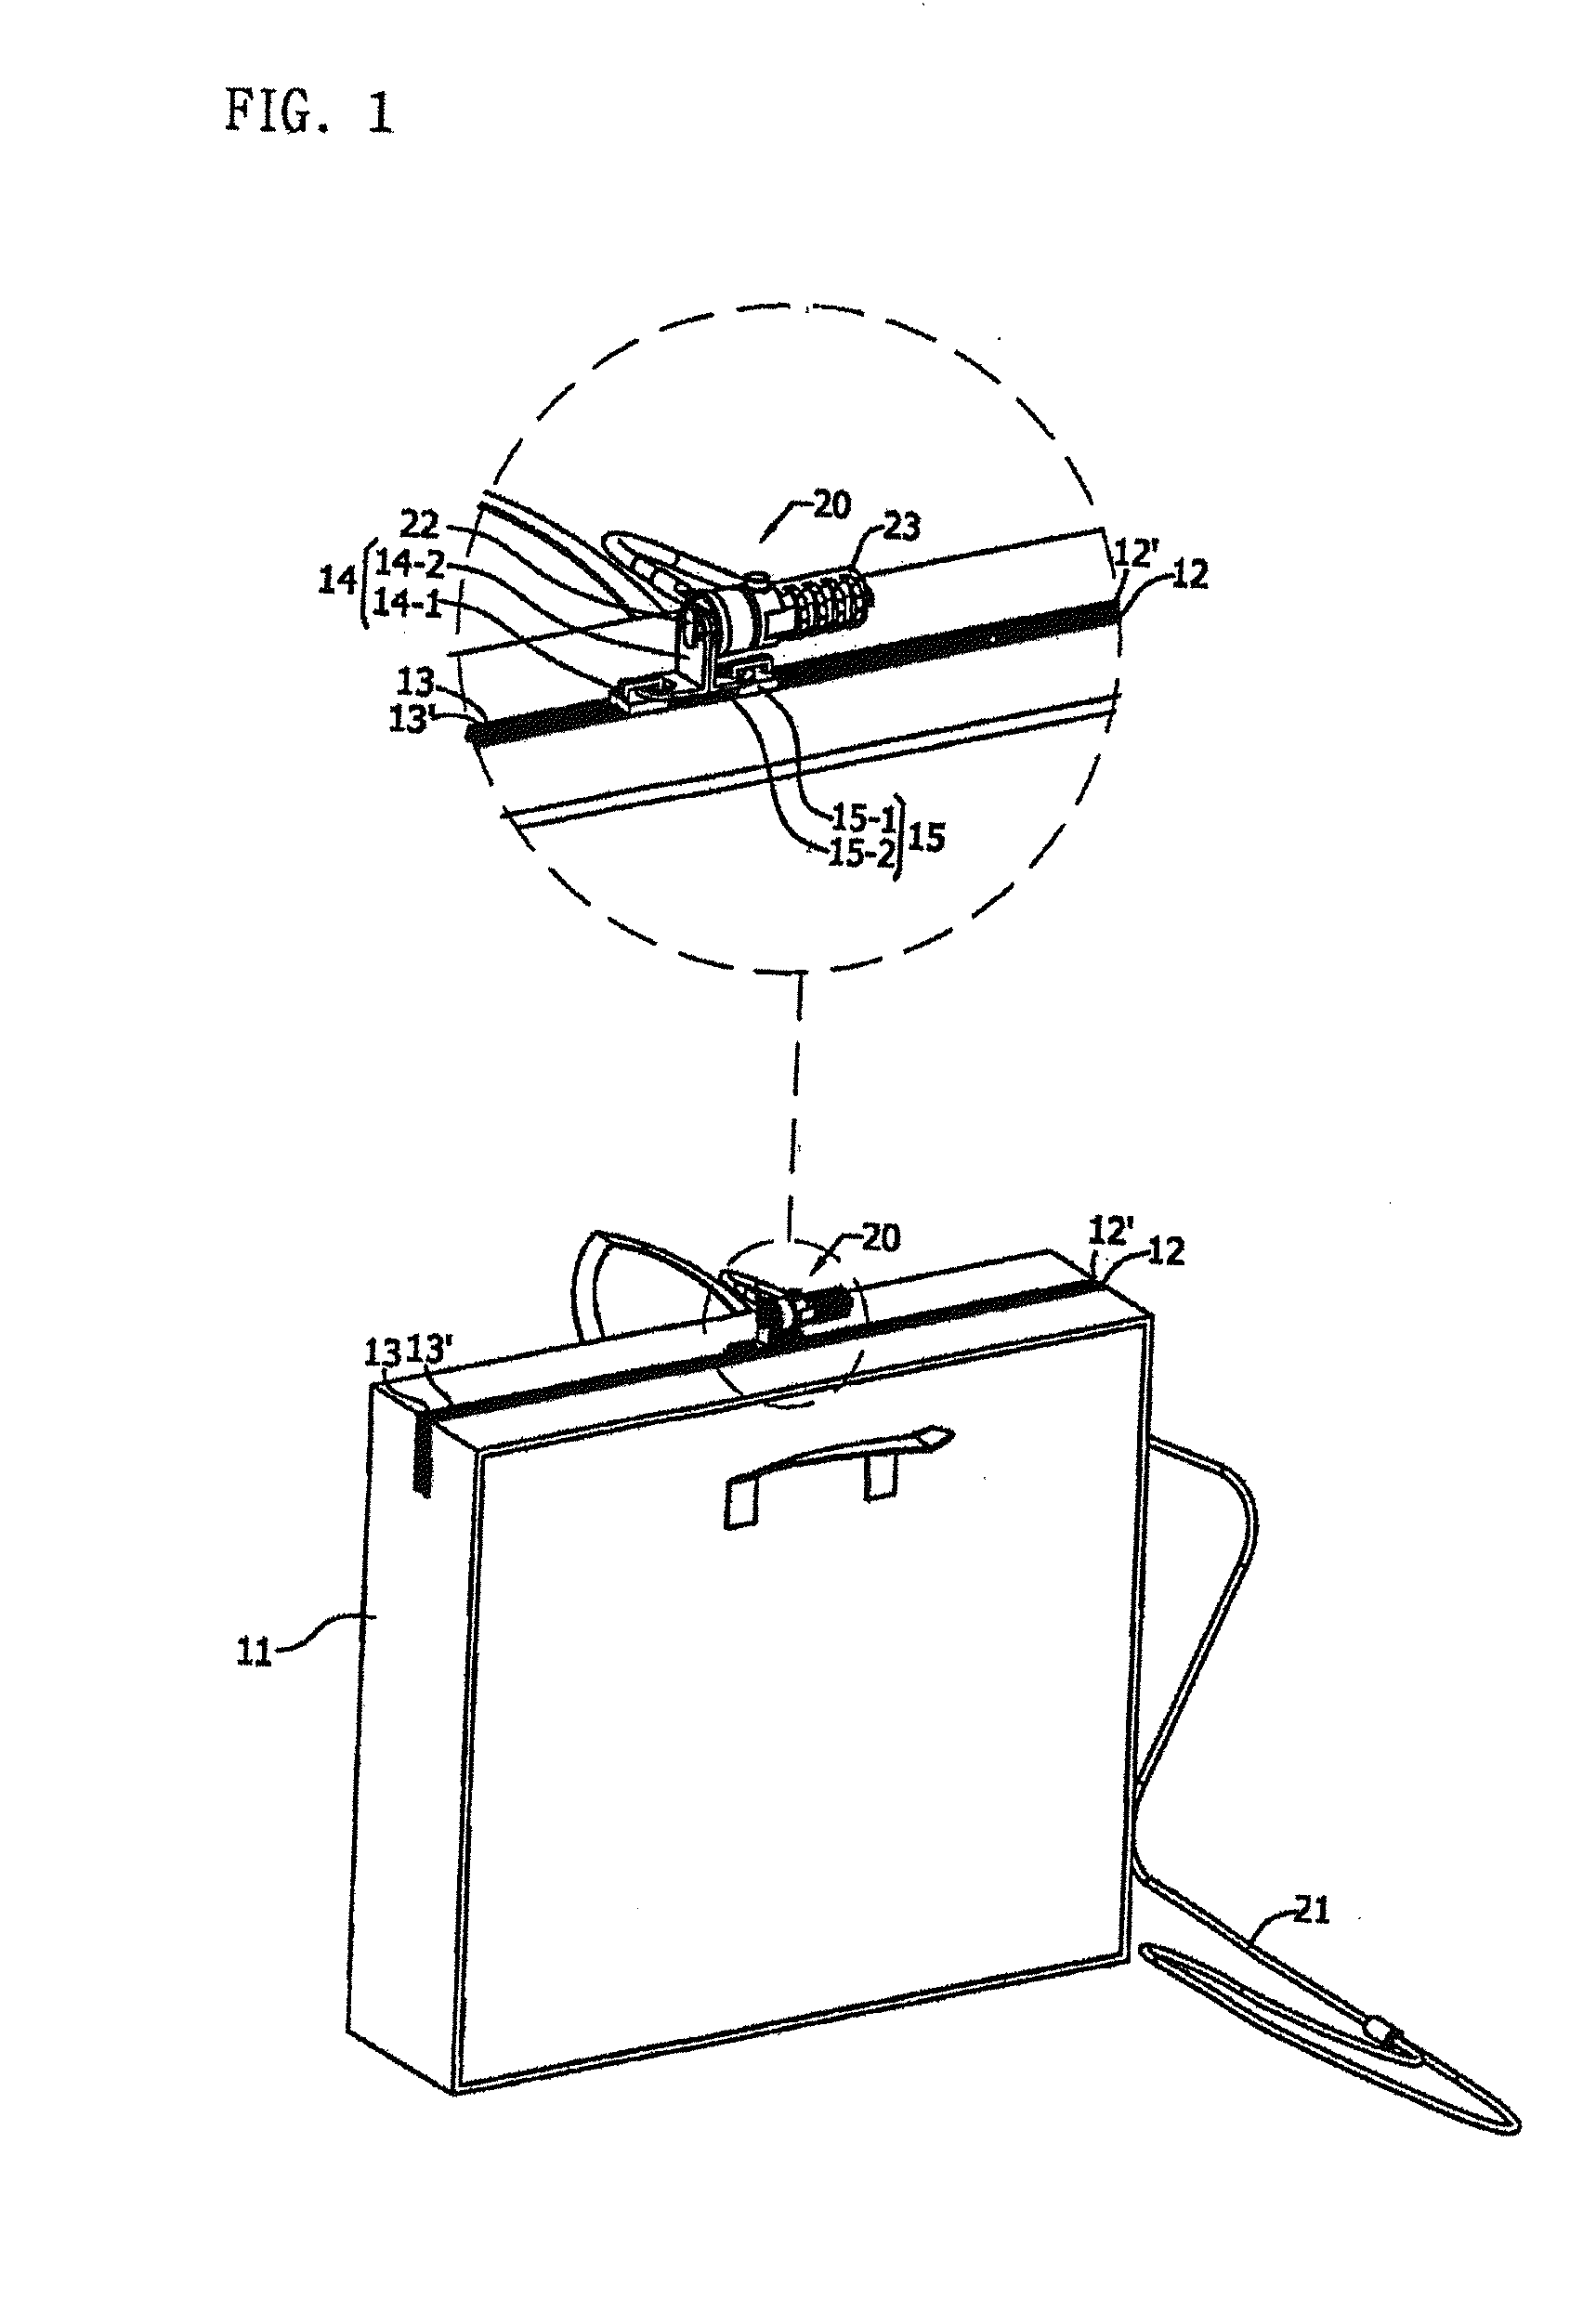 Bag with Anti-theft function cross reference to related application